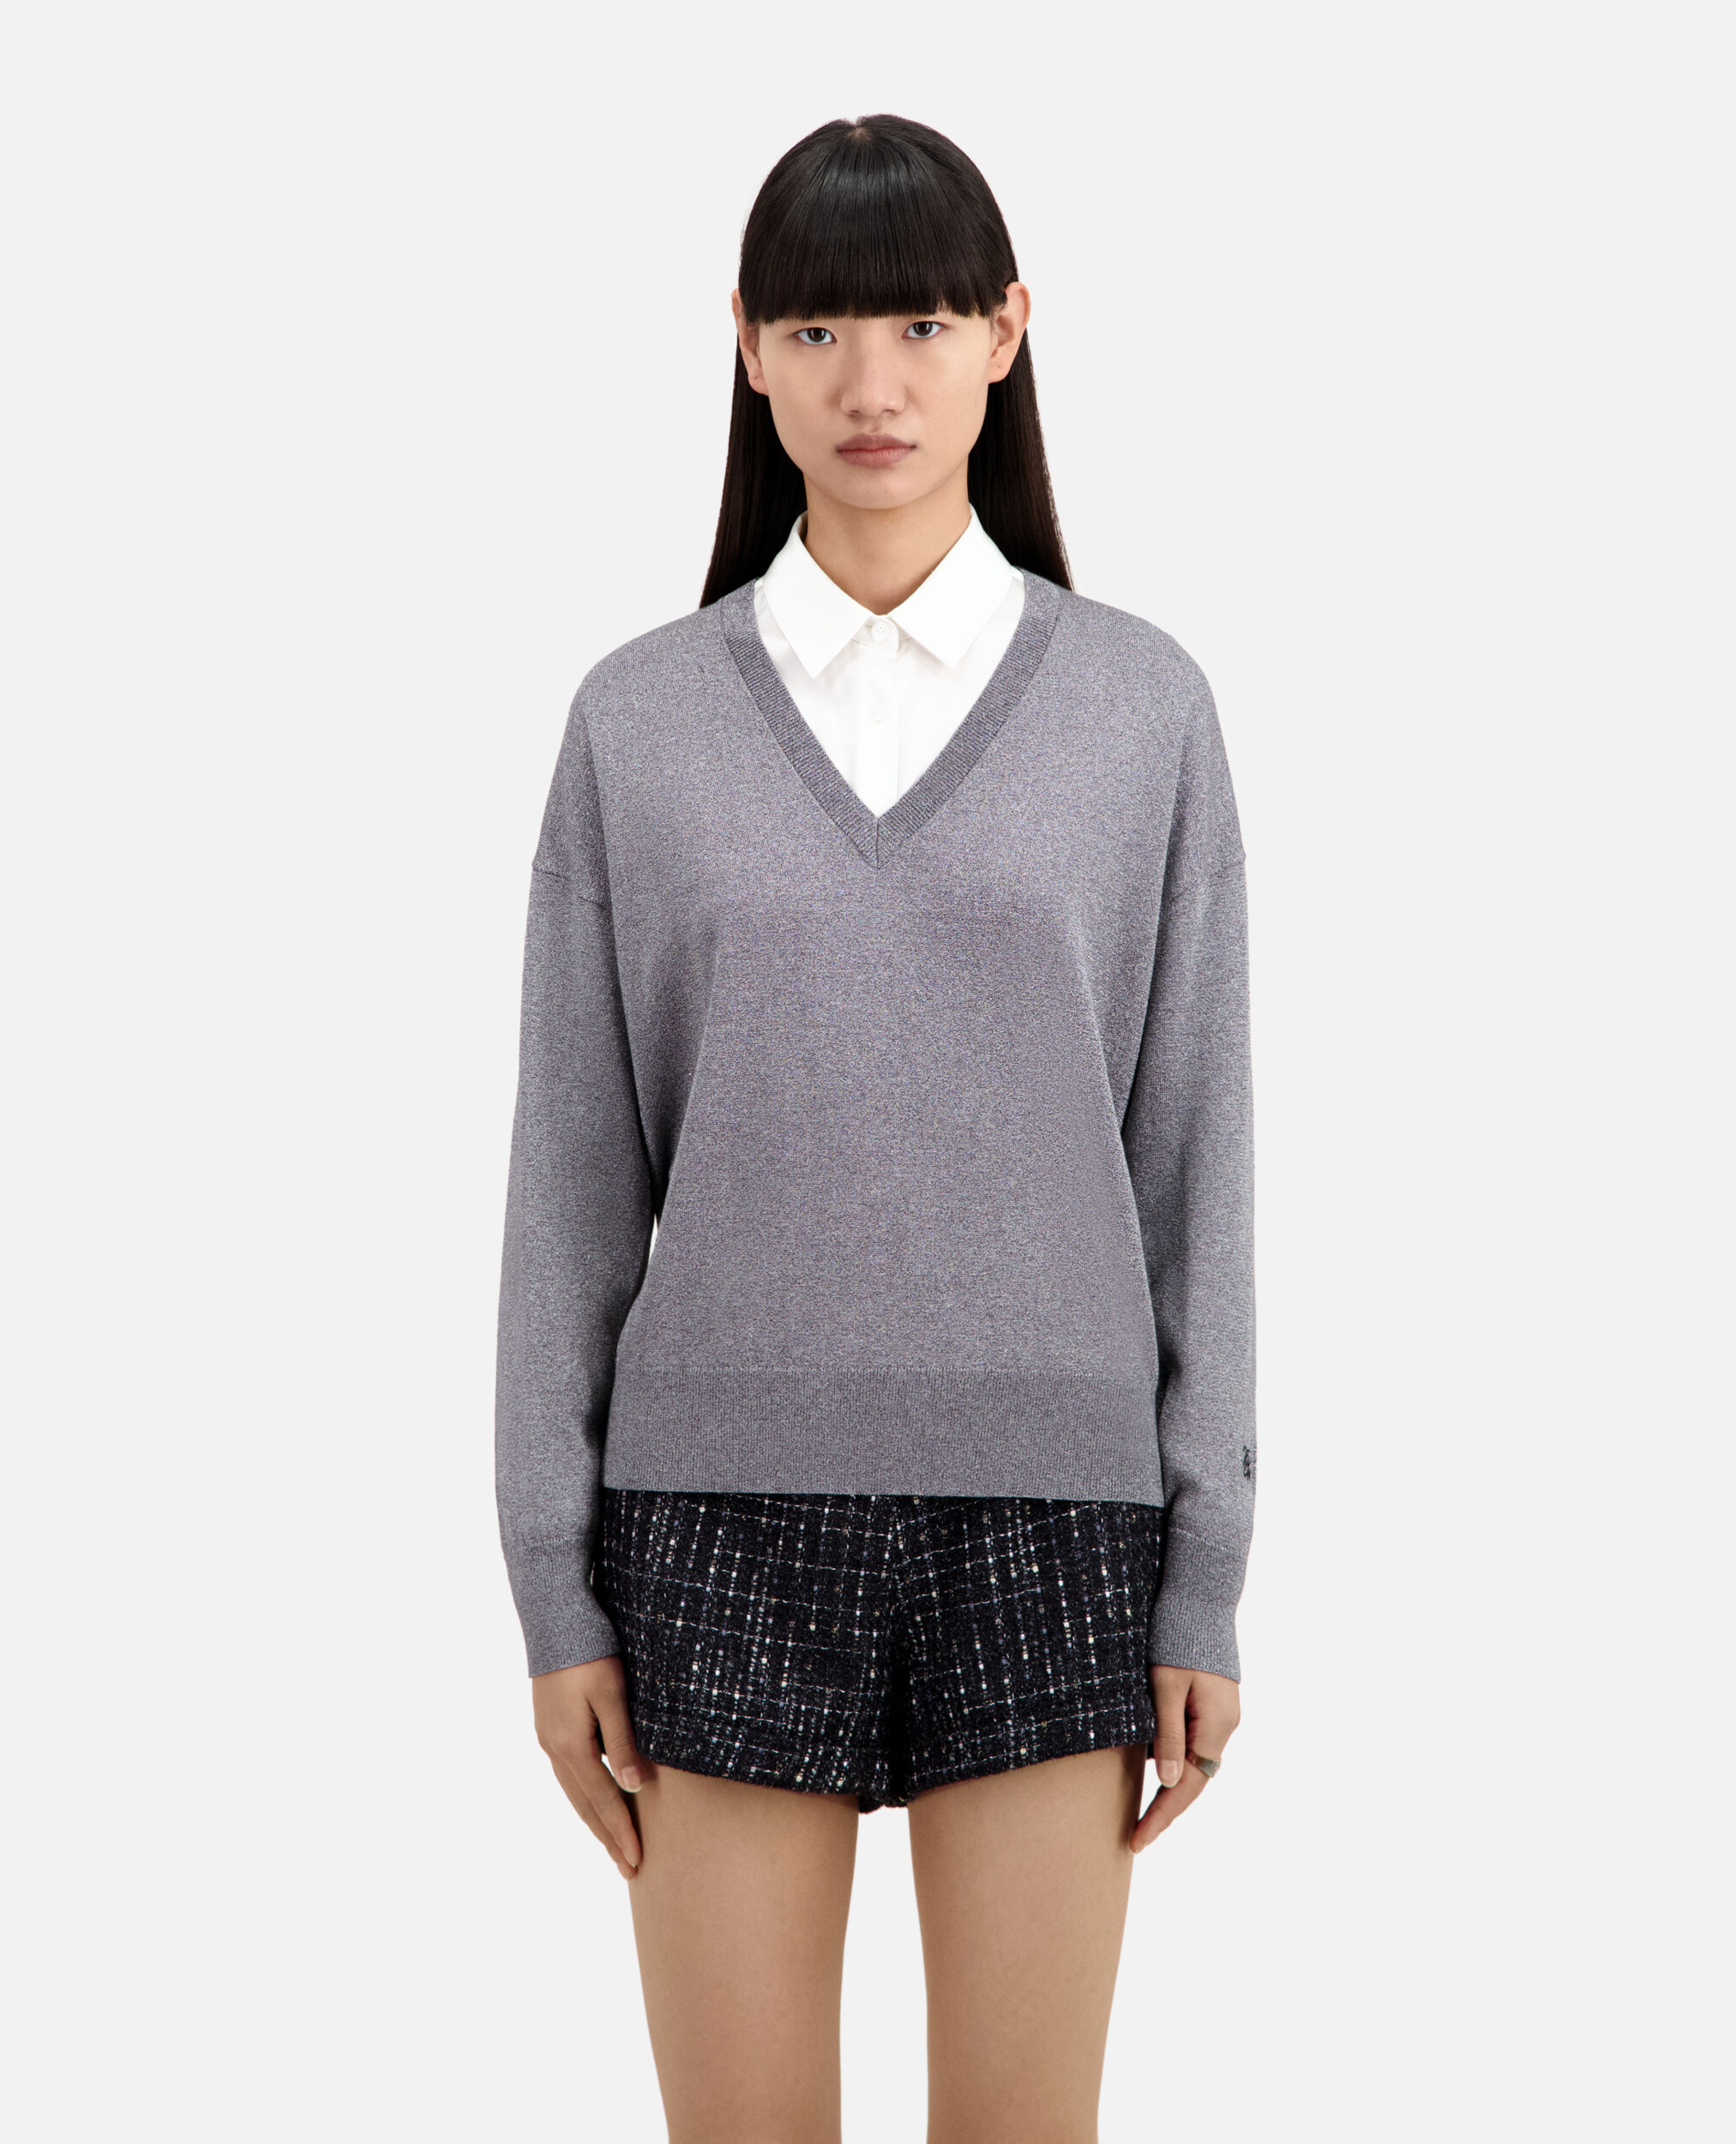 Grey glitter effect sweater, GRIS / SILVER, hi-res image number null